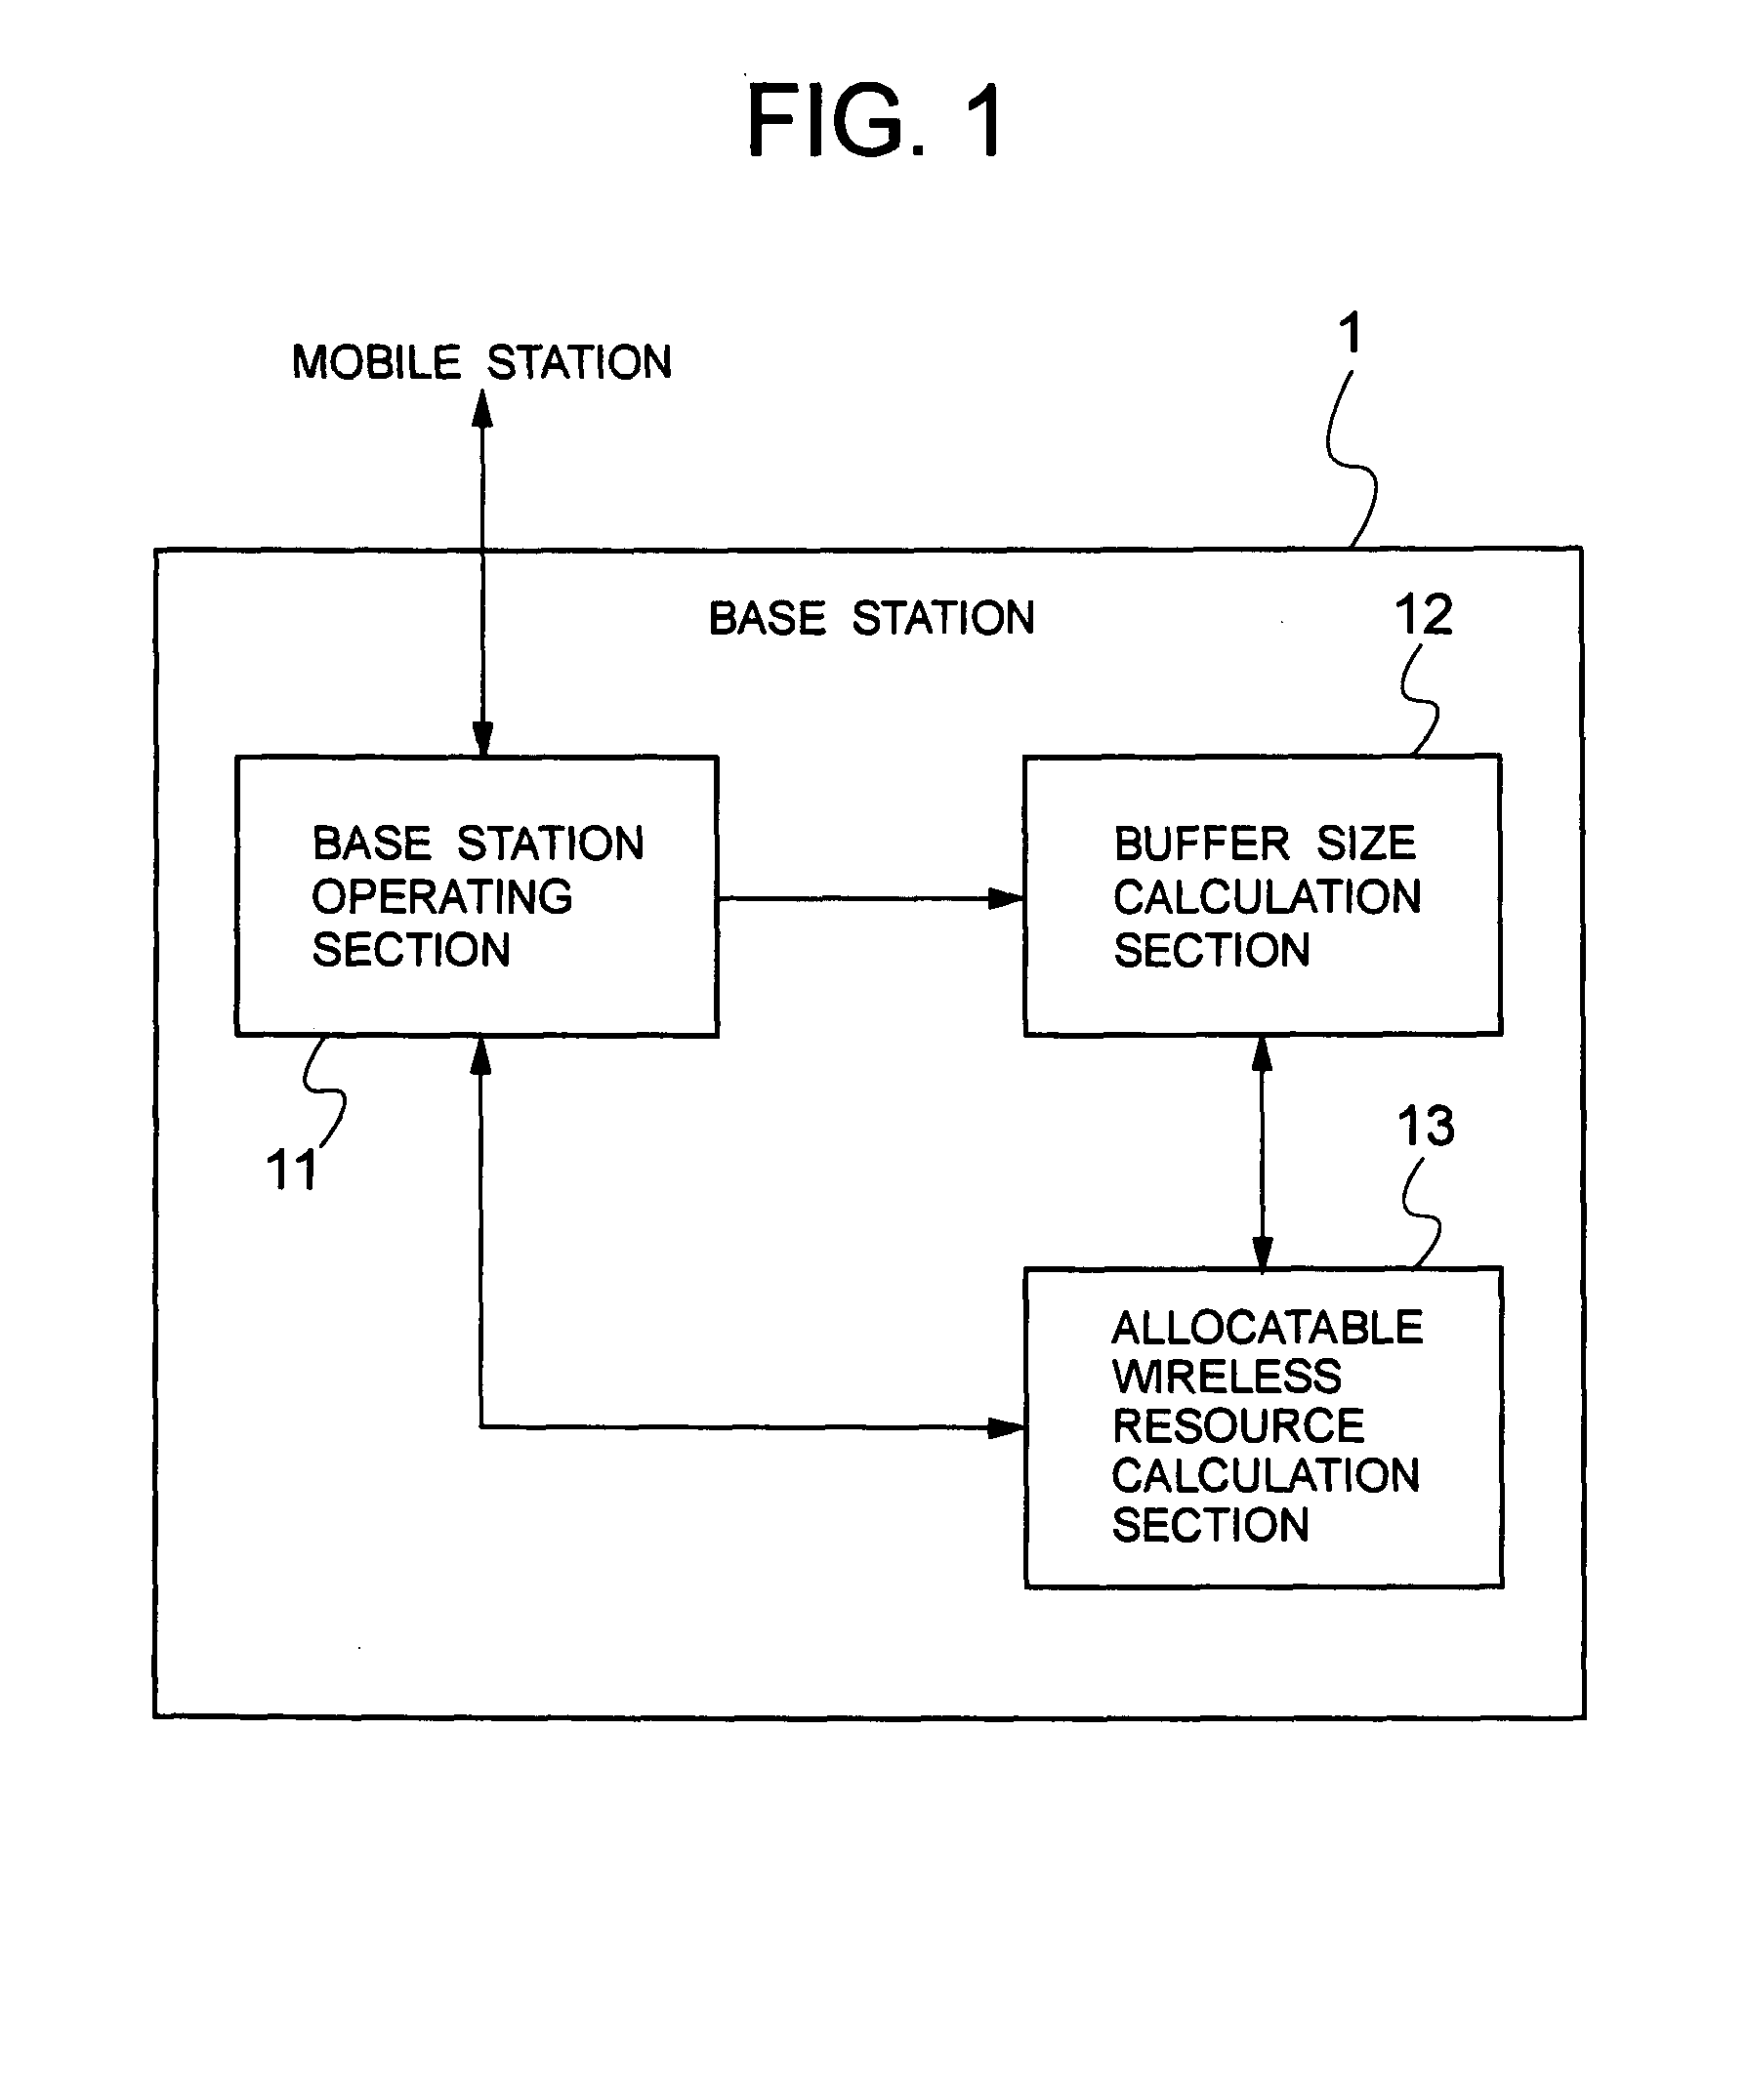 System and method for wireless resource allocation, and base station used therefor